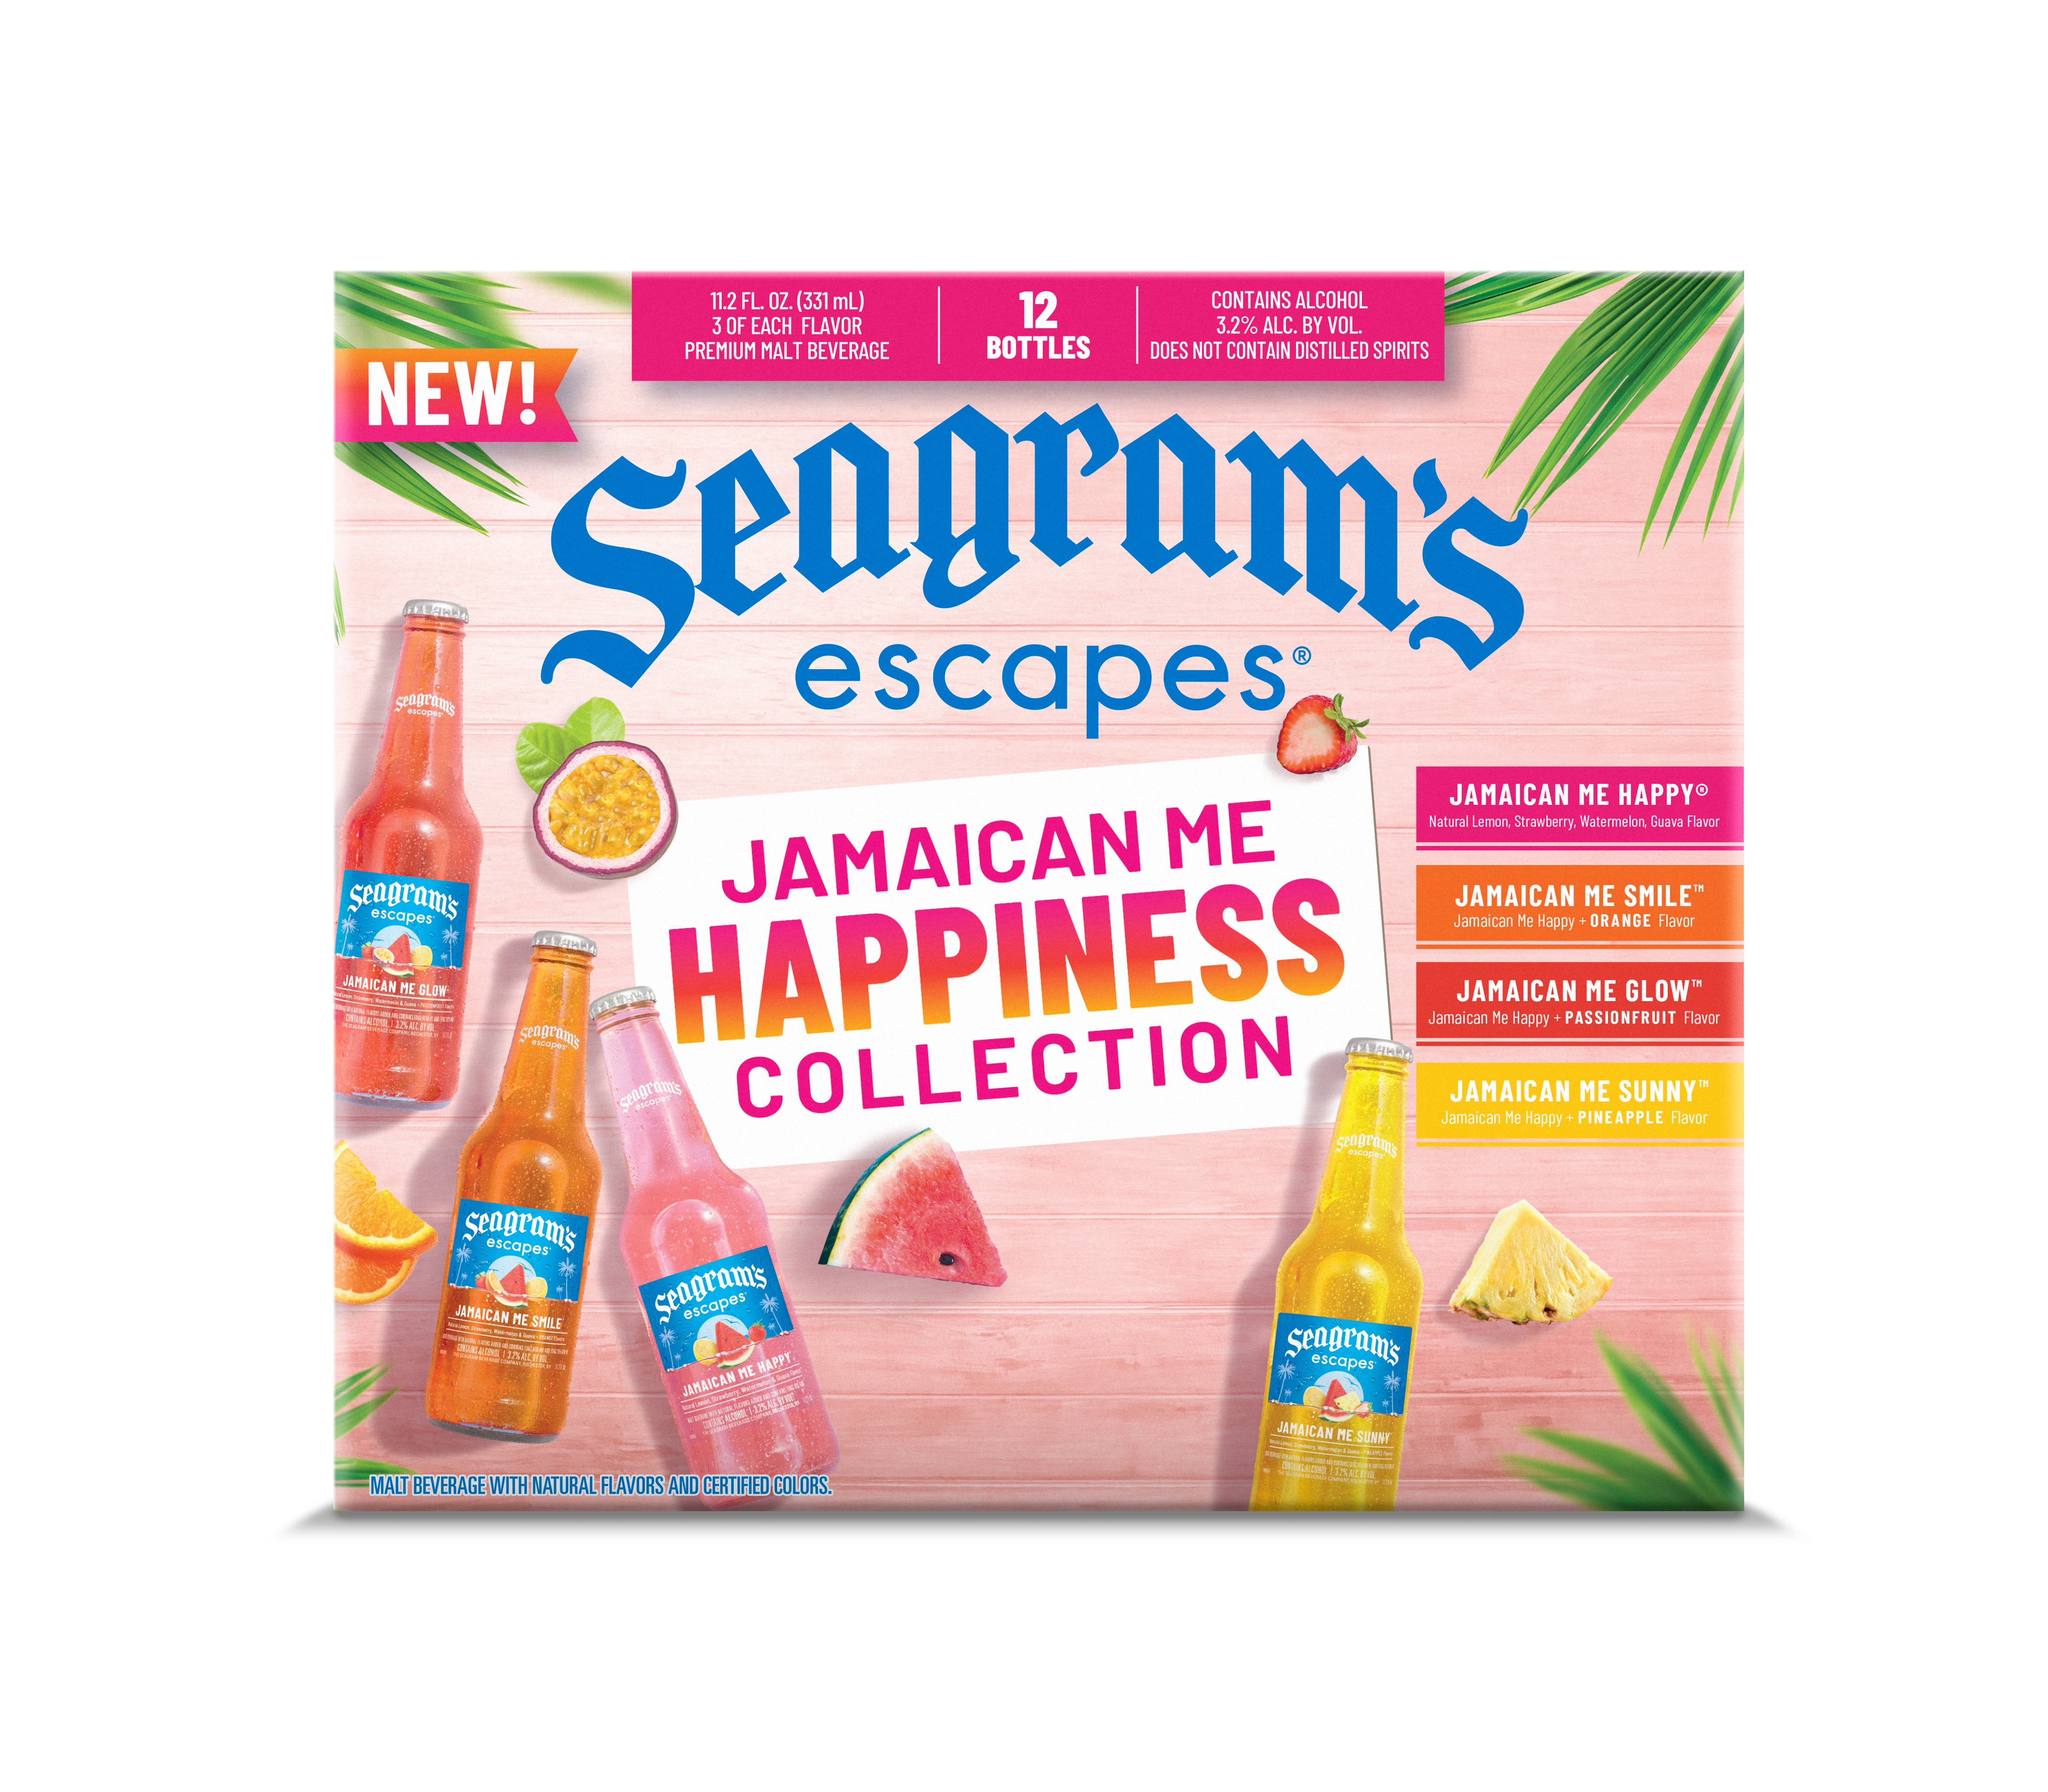 Seagram's Escapes Jamaican Me Happiness Collection, Flavored Malt Beverage, 12 pack, 11.2 fl oz Glass Bottles, 3.2% ABV - image 2 of 4